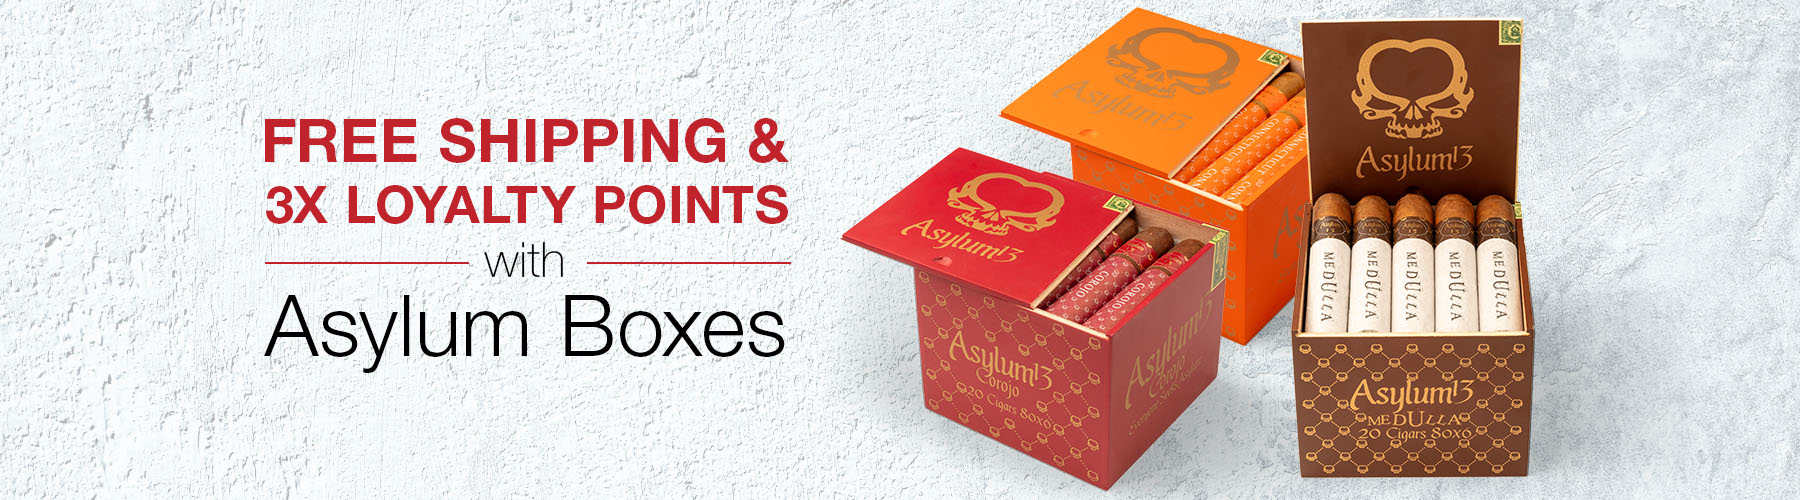 Free Shipping & 3X Loyalty Points with Asylum boxes!